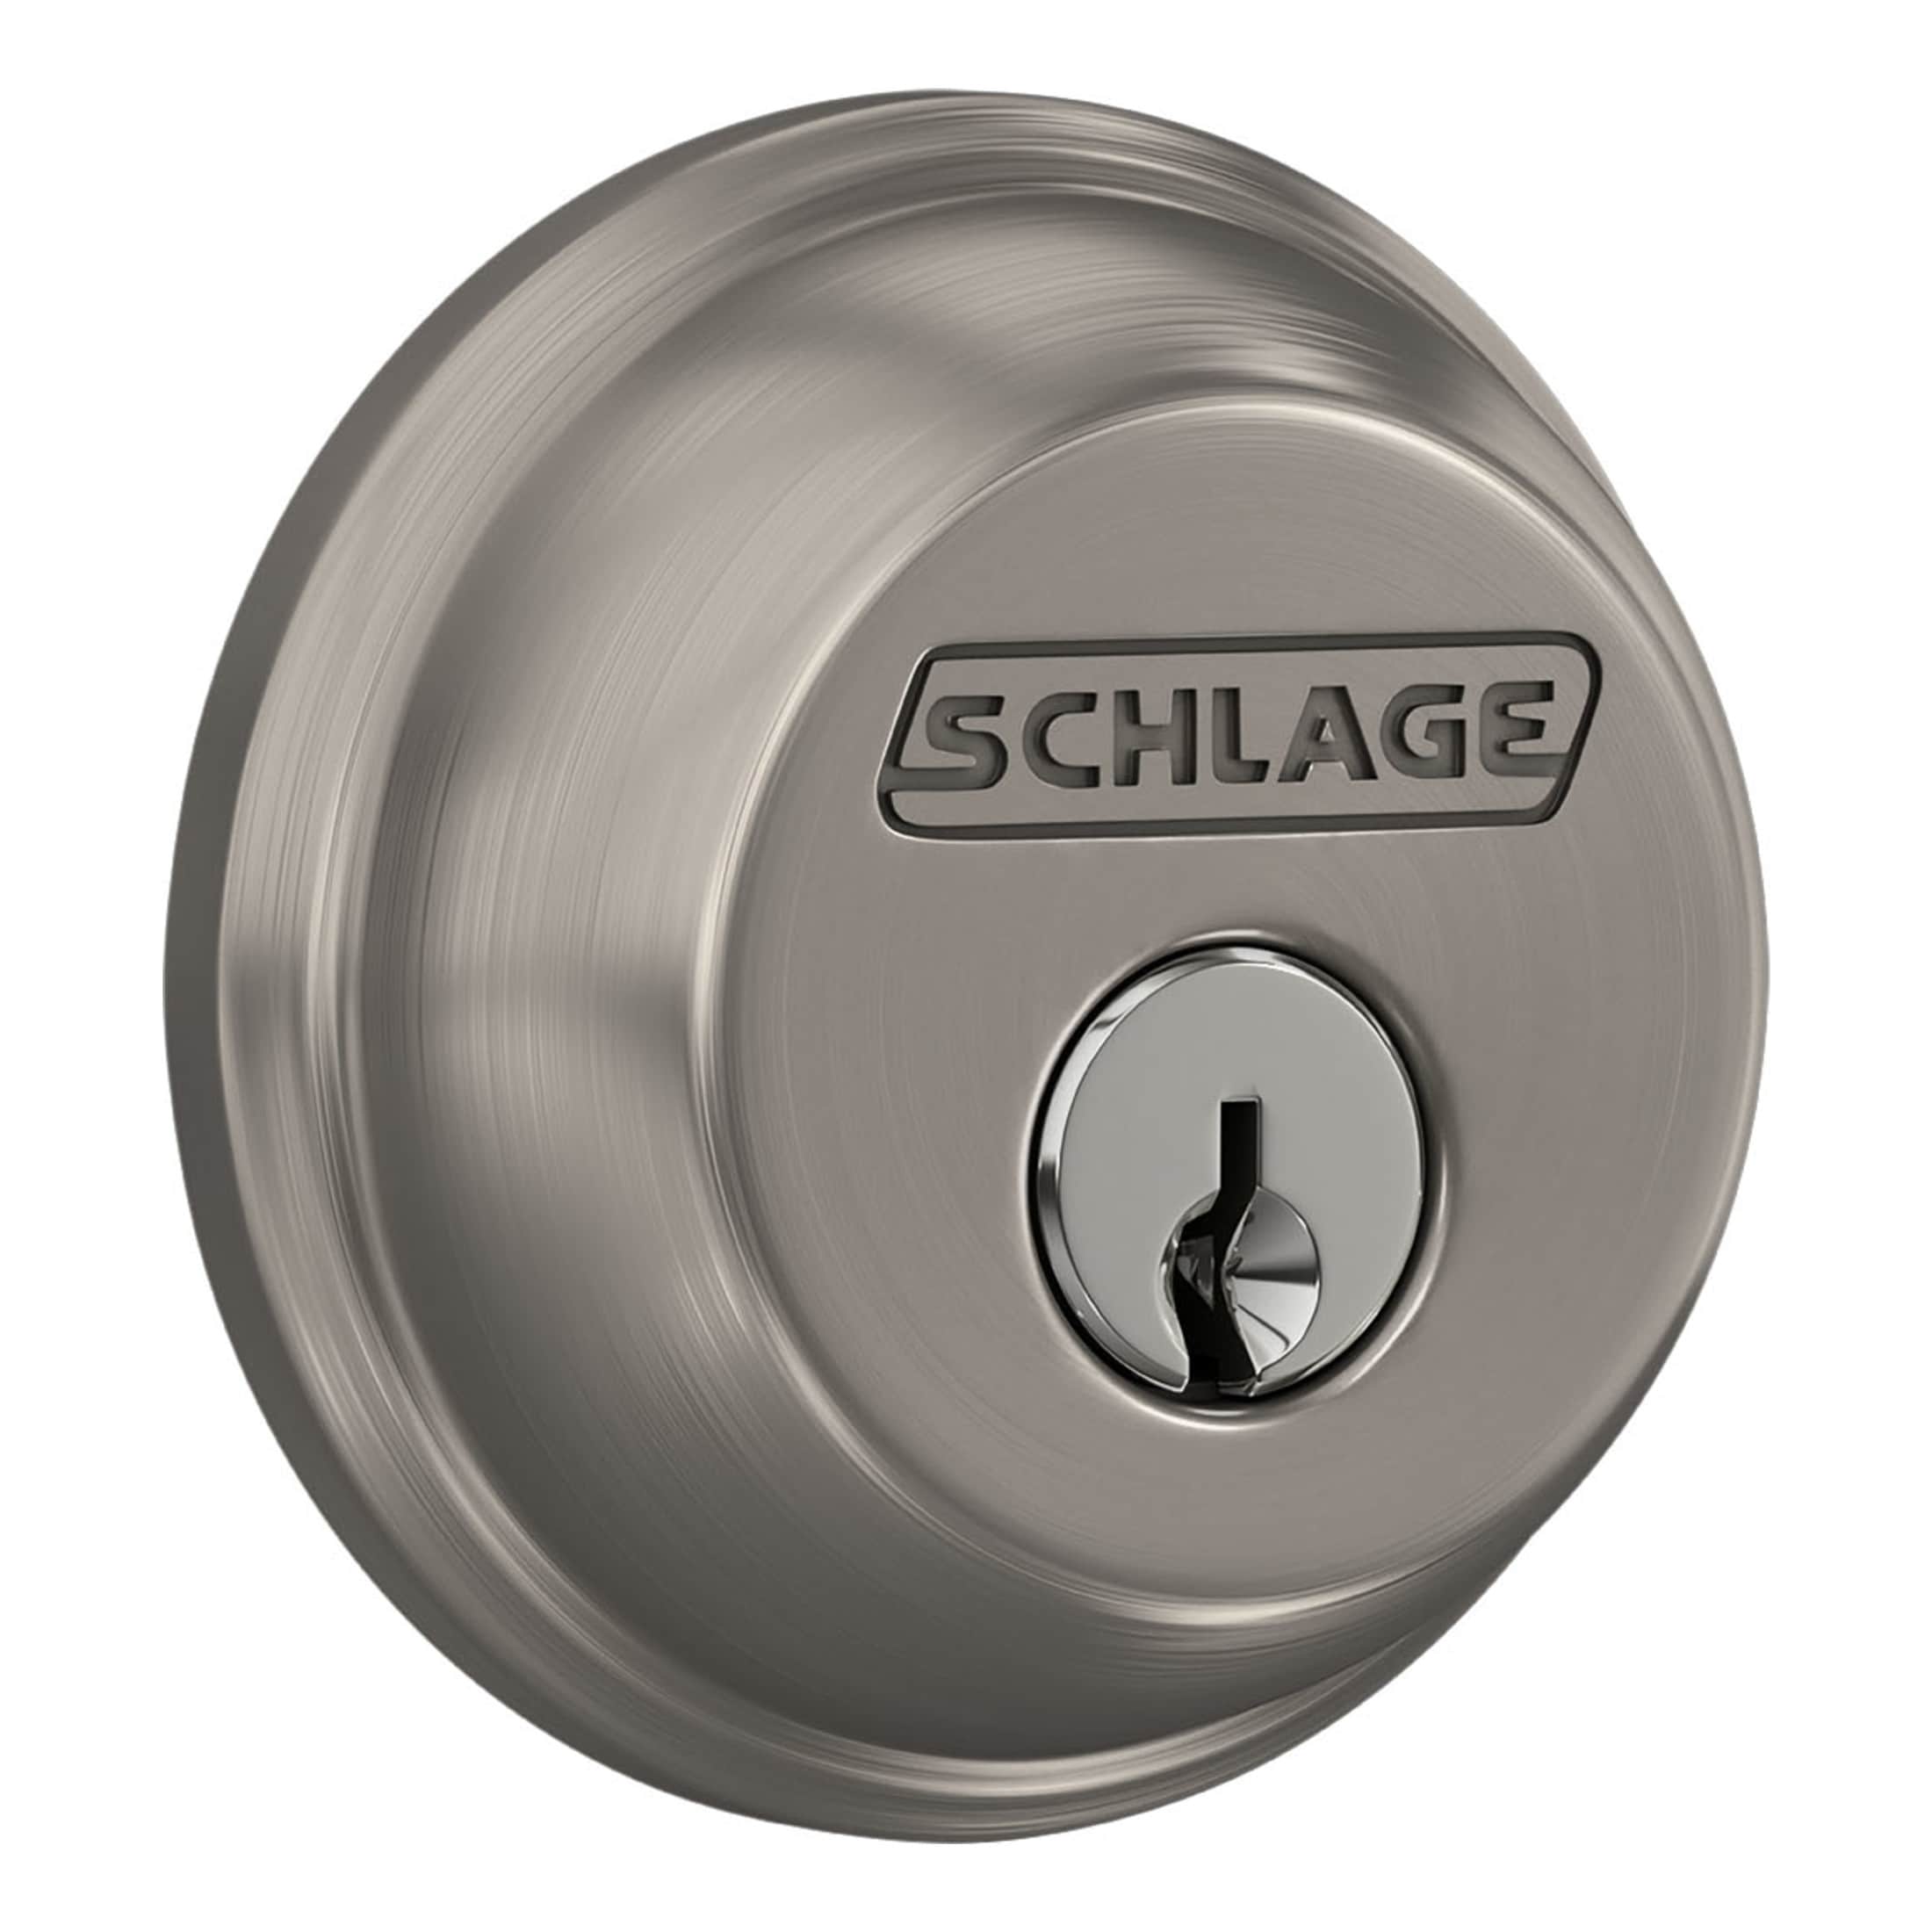 MUL-T-LOCK ONLINE :: Tailpiece for MUL-T-LOCK Cylinder for SCHLAGE Single Cylinder  Deadbolt